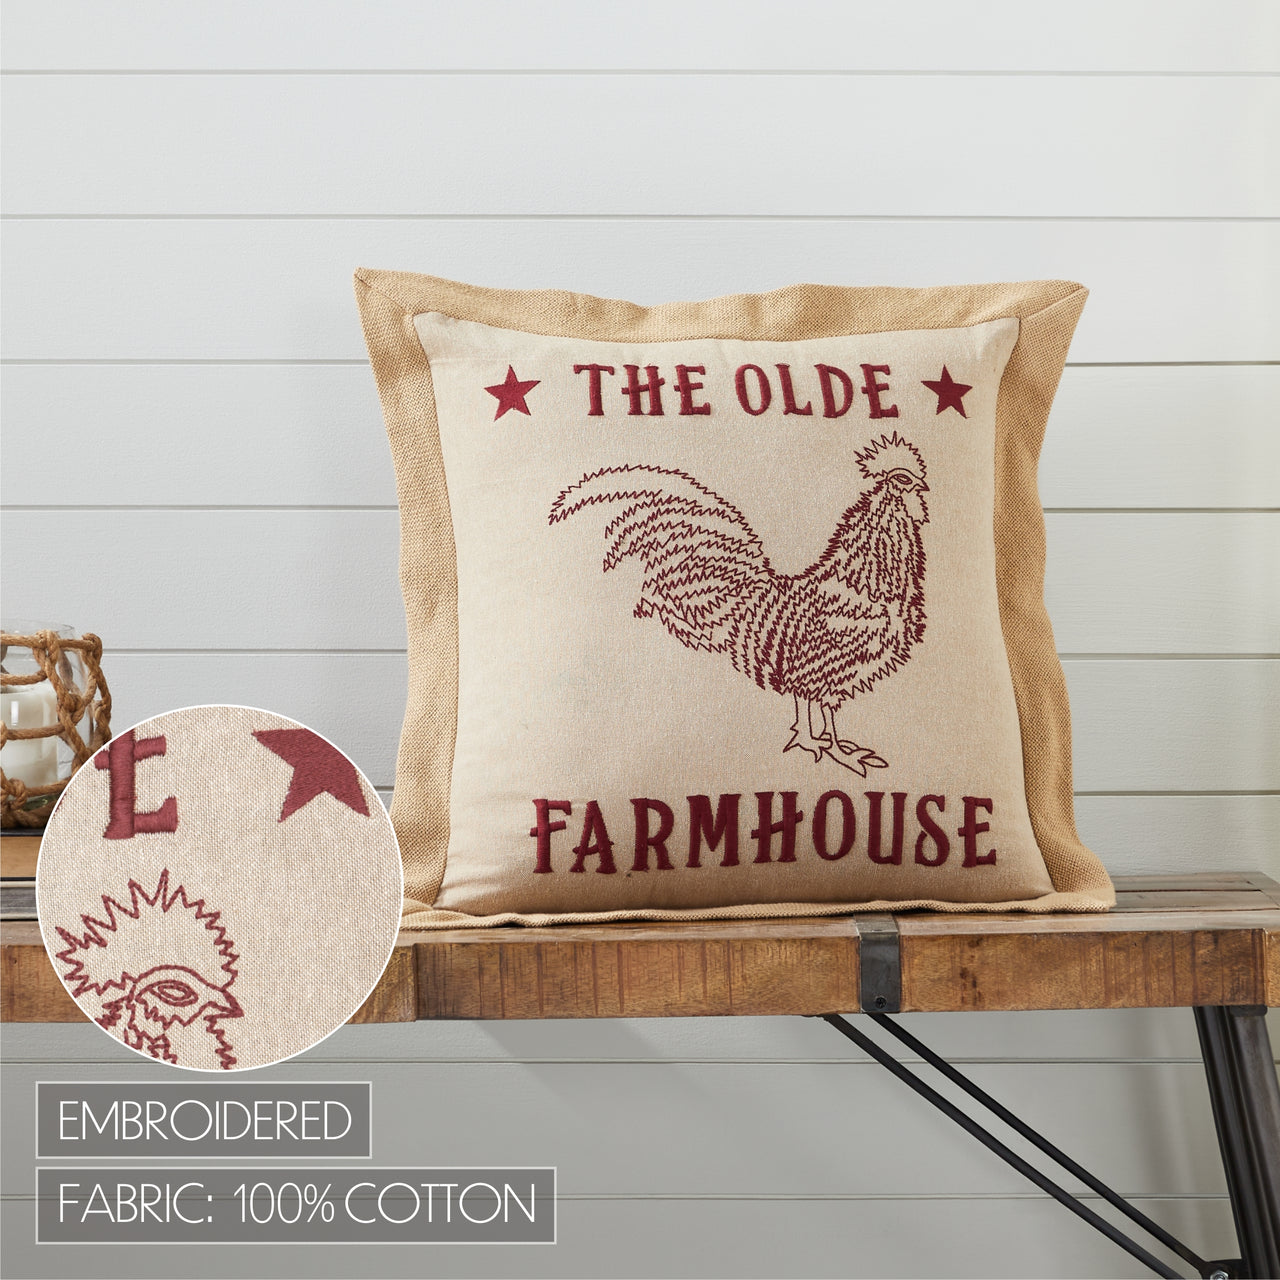 Cider Mill Olde Farmhouse Pillow 18x18 VHC Brands